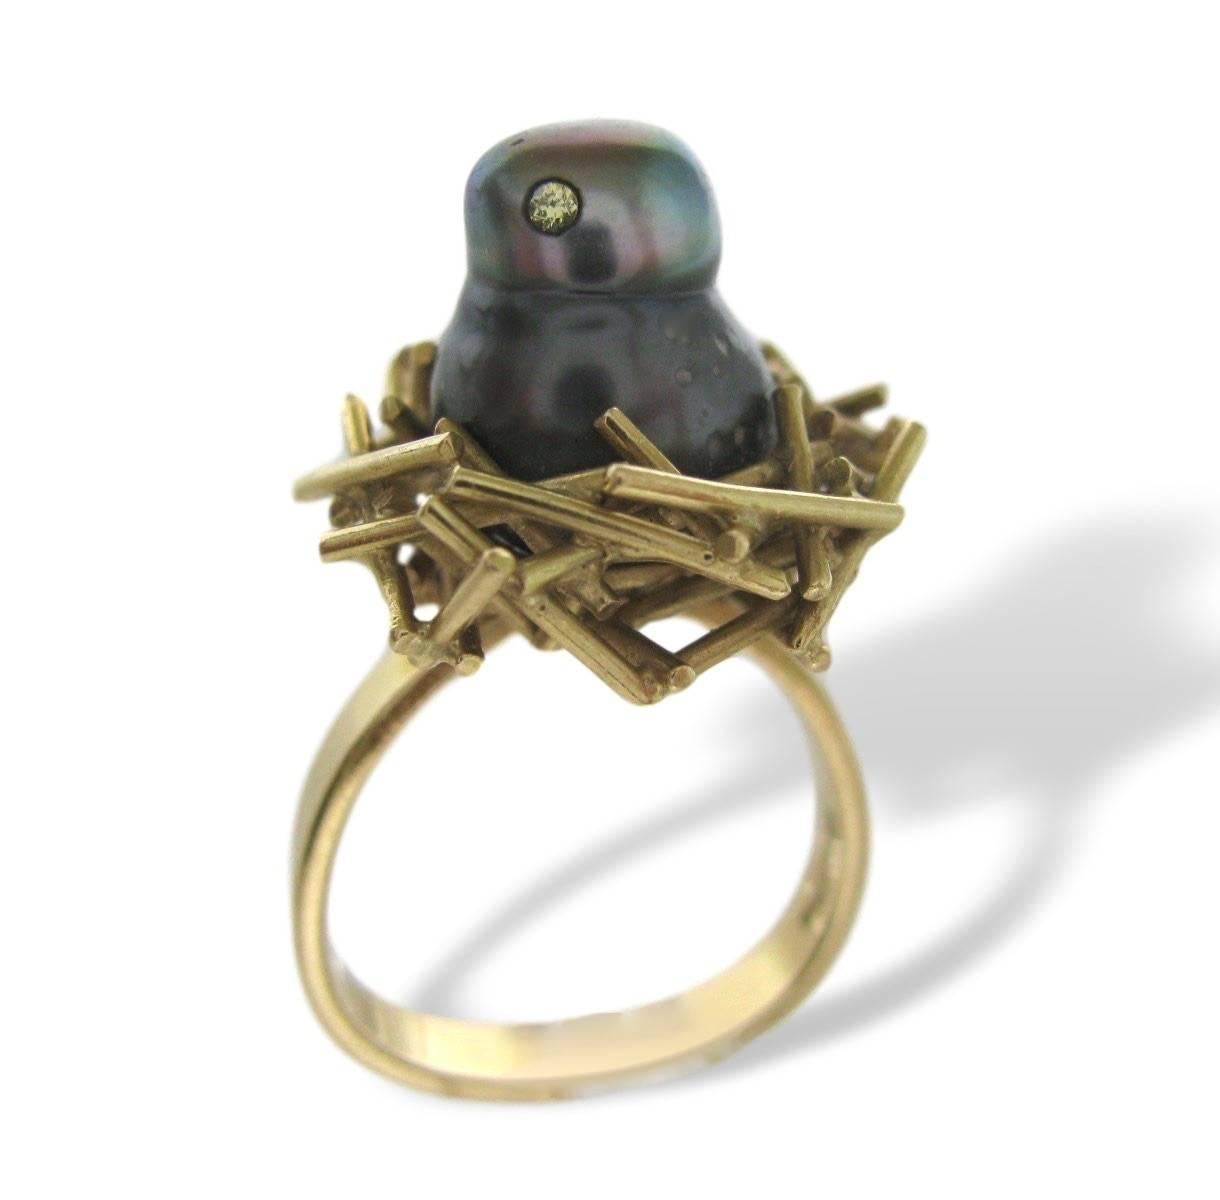 Tahitian pearl chick ring by Andrew Grima. The 18k mount in the shape of a stylized nest in which a Chick -shaped black-grey pearl with light gold diamond eyes happily nests. A cute and sentimental piece of Grima Jewellery. Know for his love of